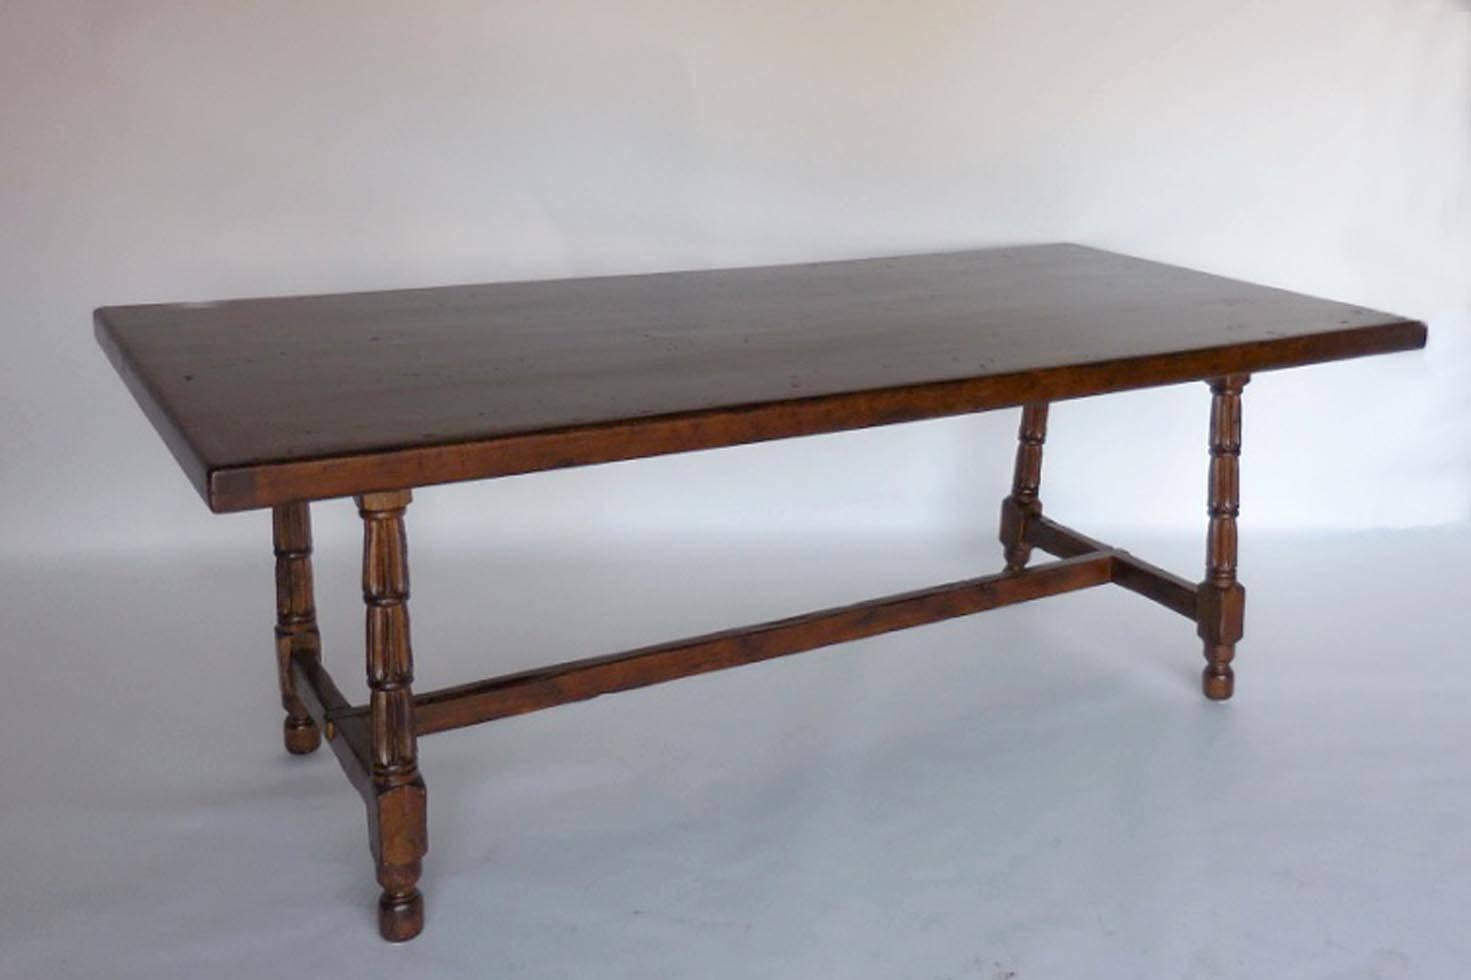 Walnut table or desk with carved fluted legs. Medium walnut finish with some applied distressing. New construction.